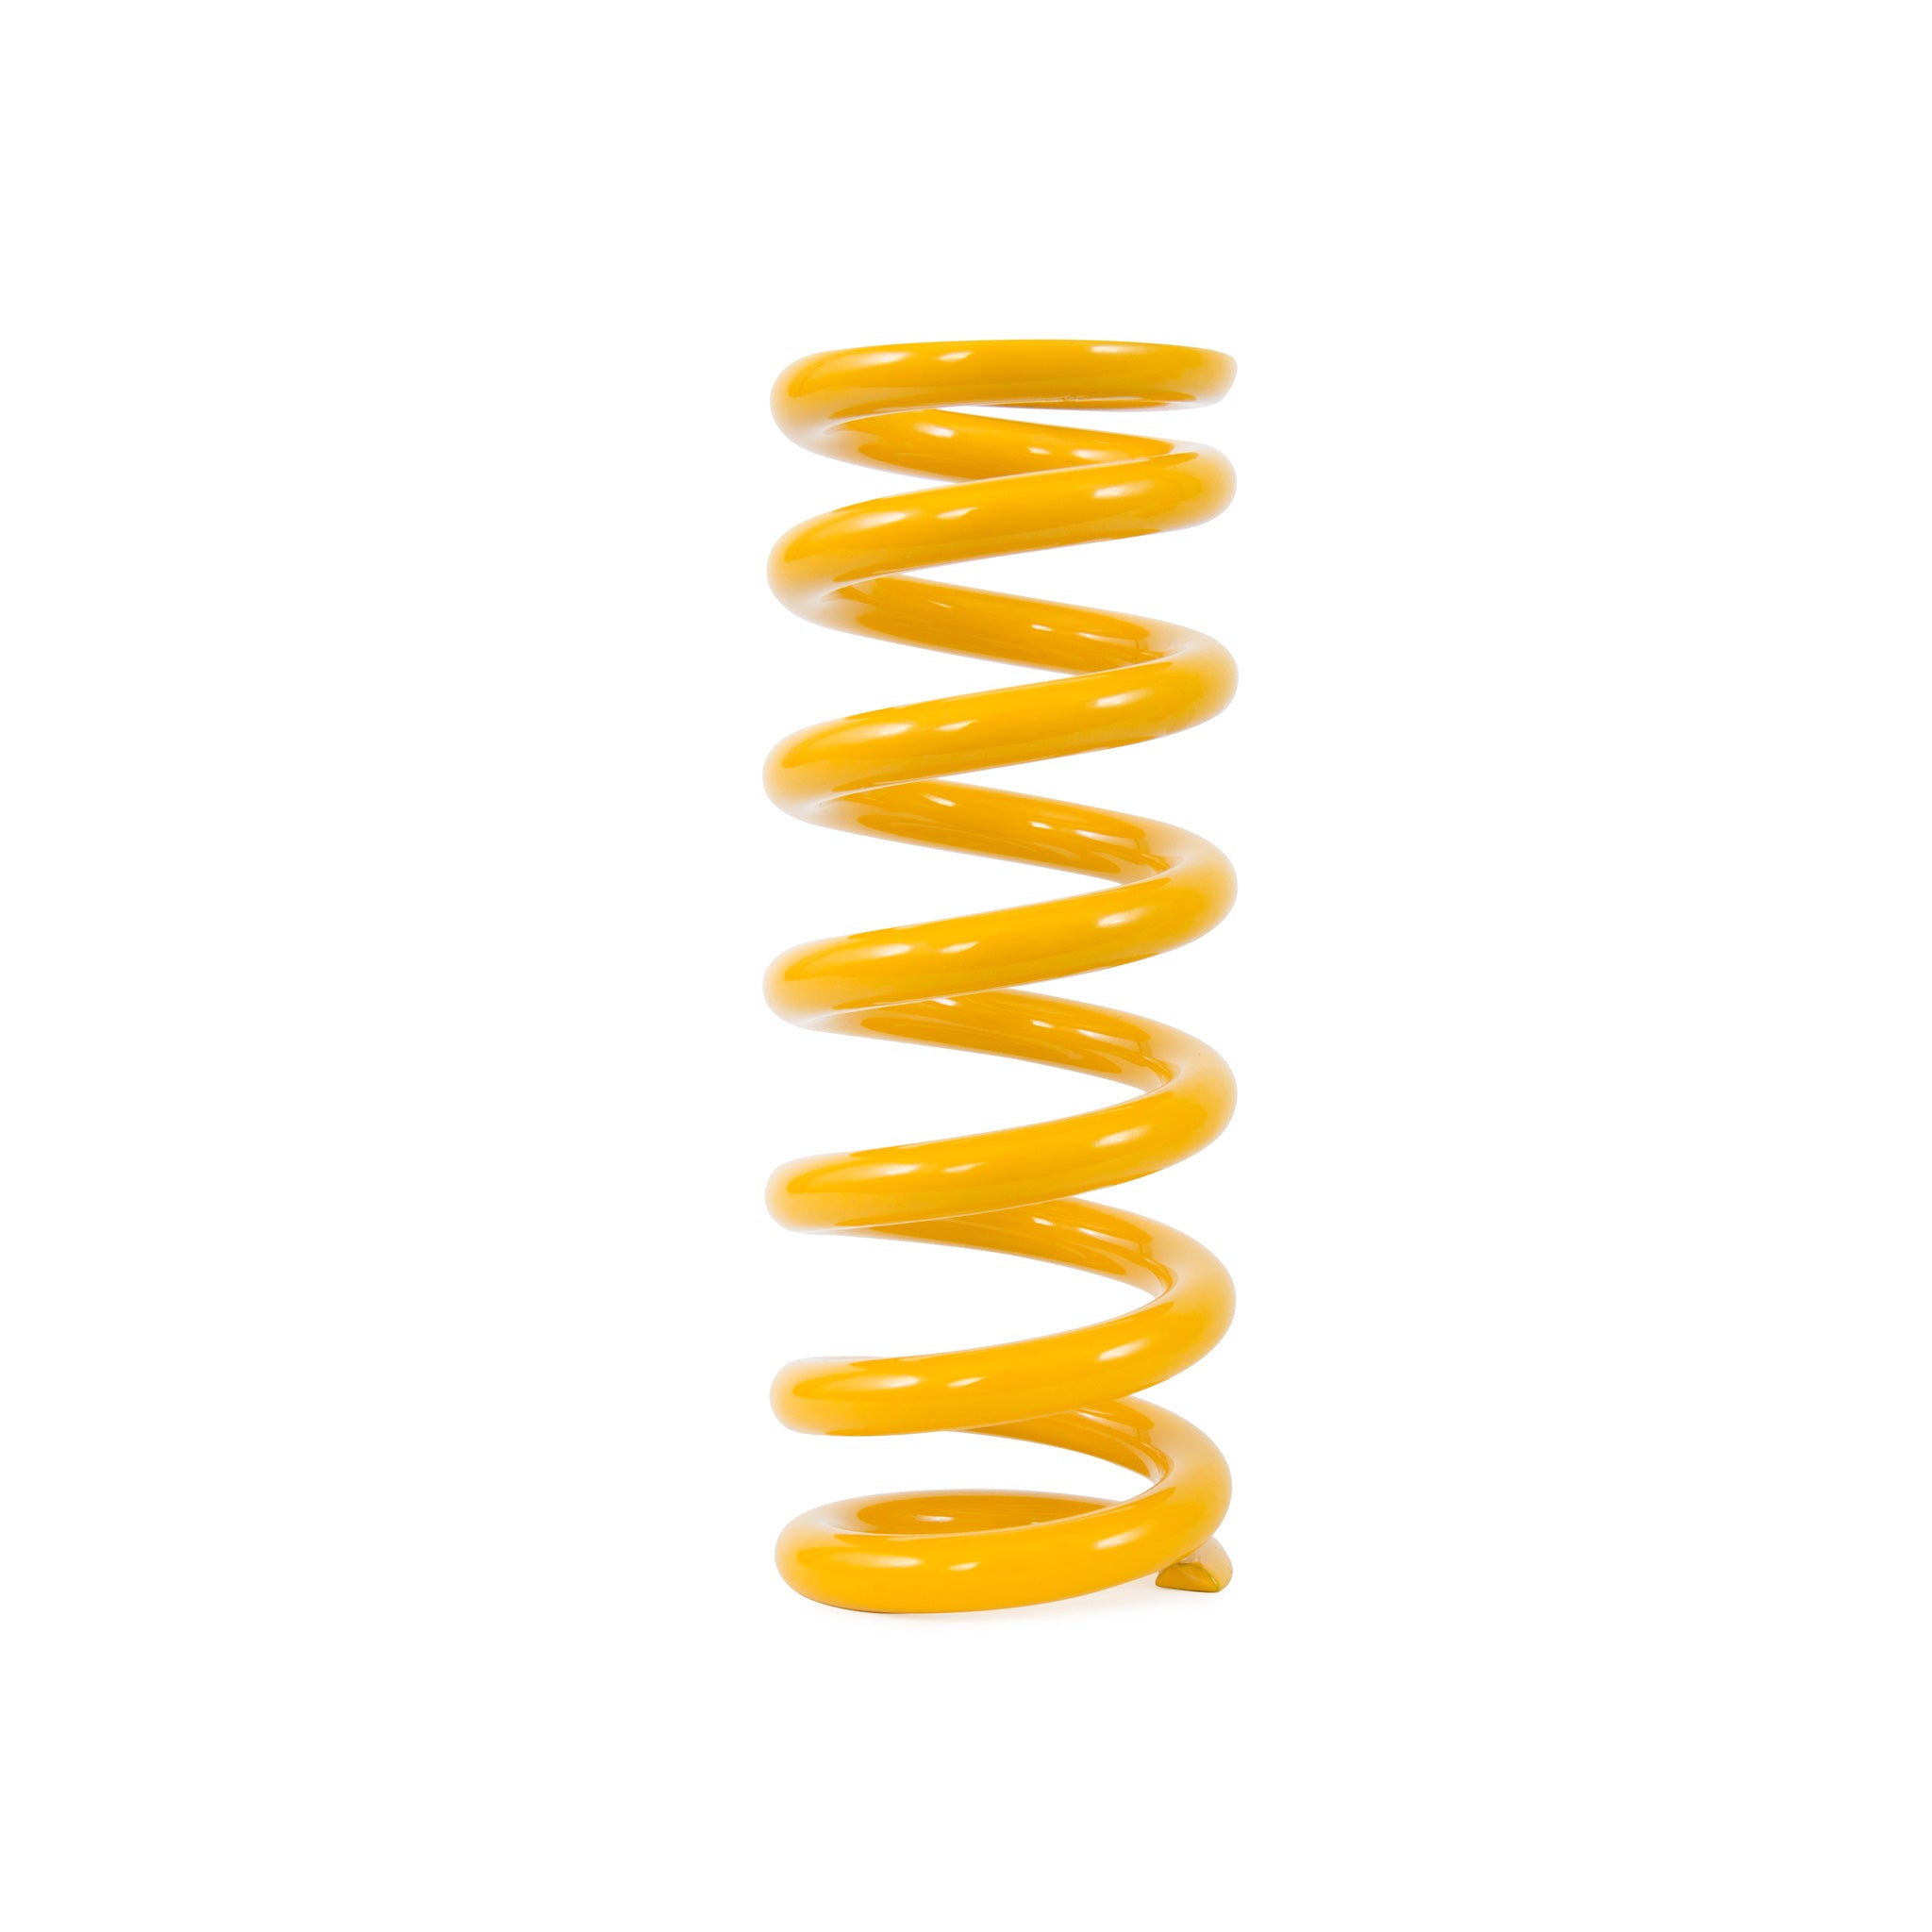 Ohlins Spring 89mm S x 411 lbs/in